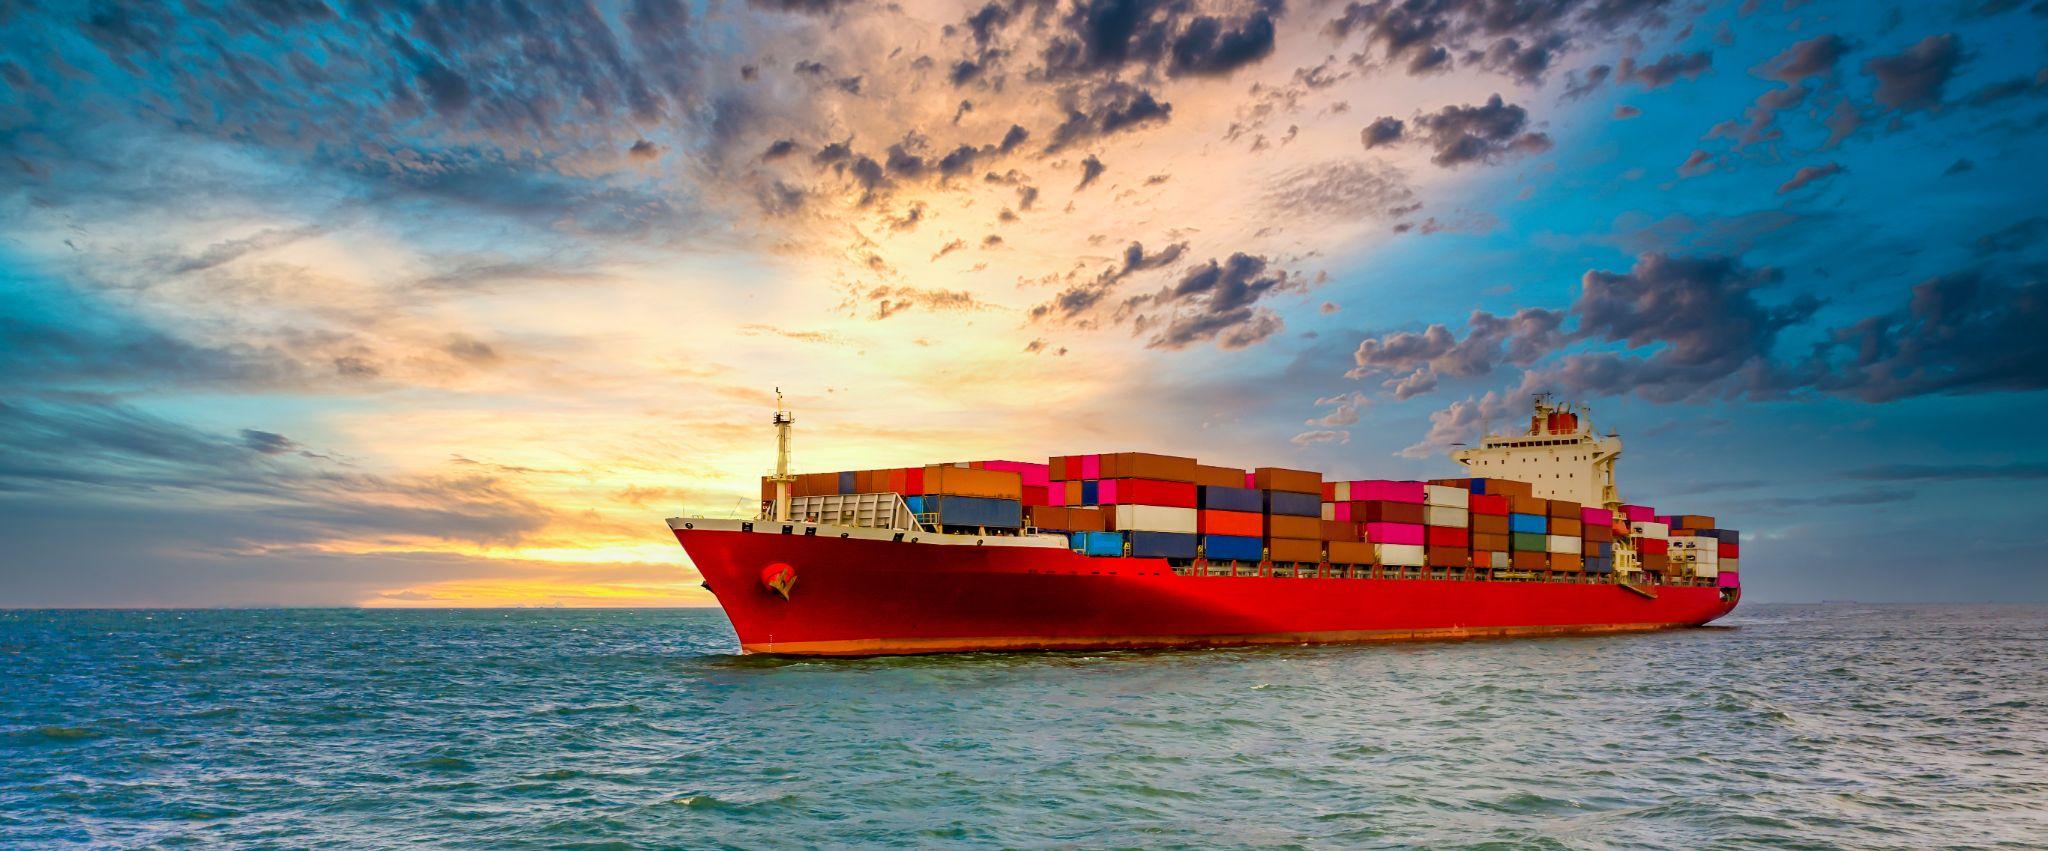 Container cargo ship, Freight shipping maritime vessel